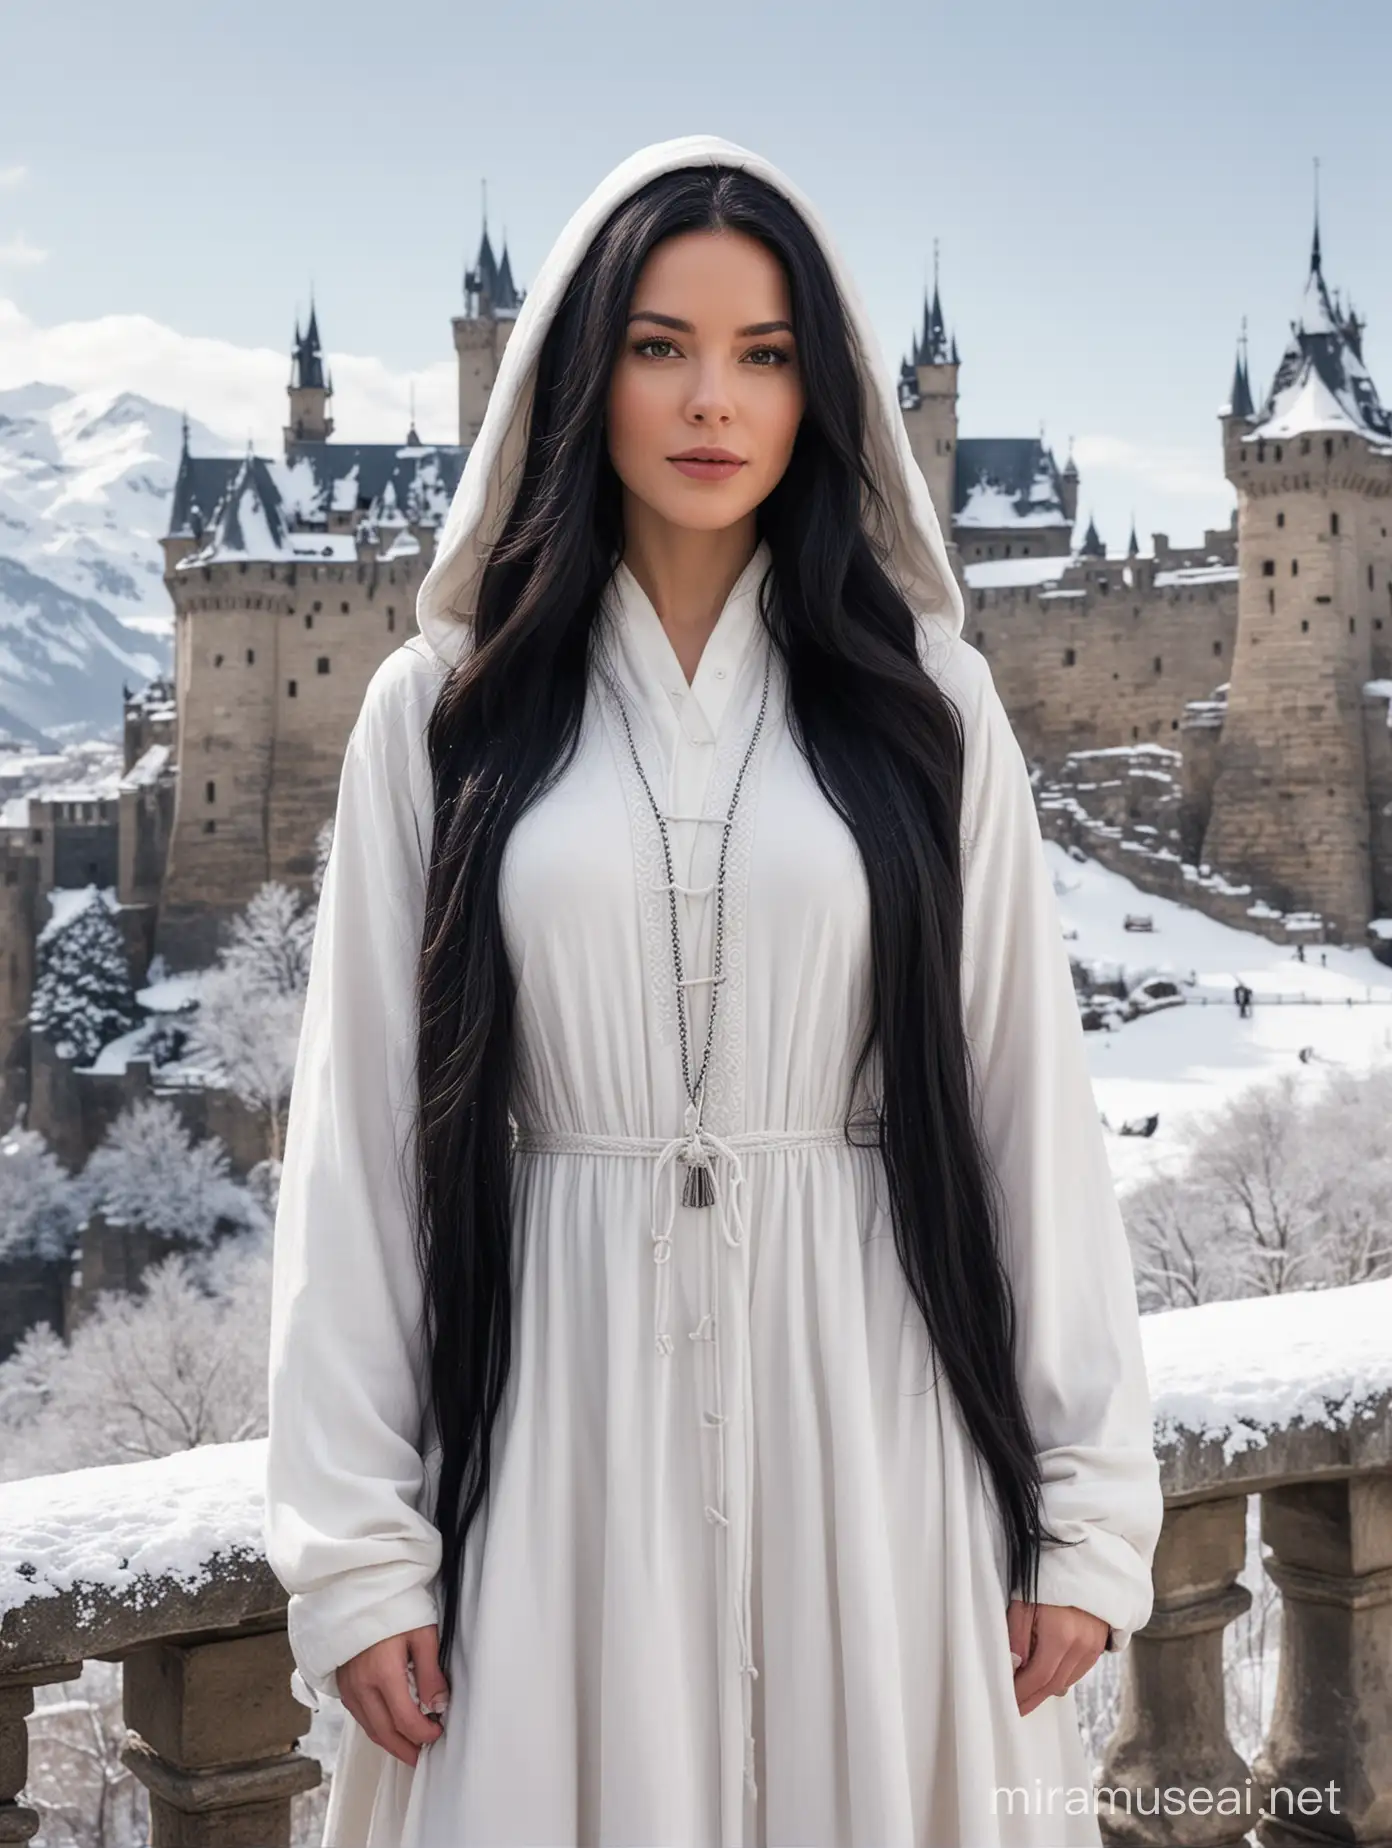 woman,long black hair,white hooded gown with details,in the background snowc-capped castle